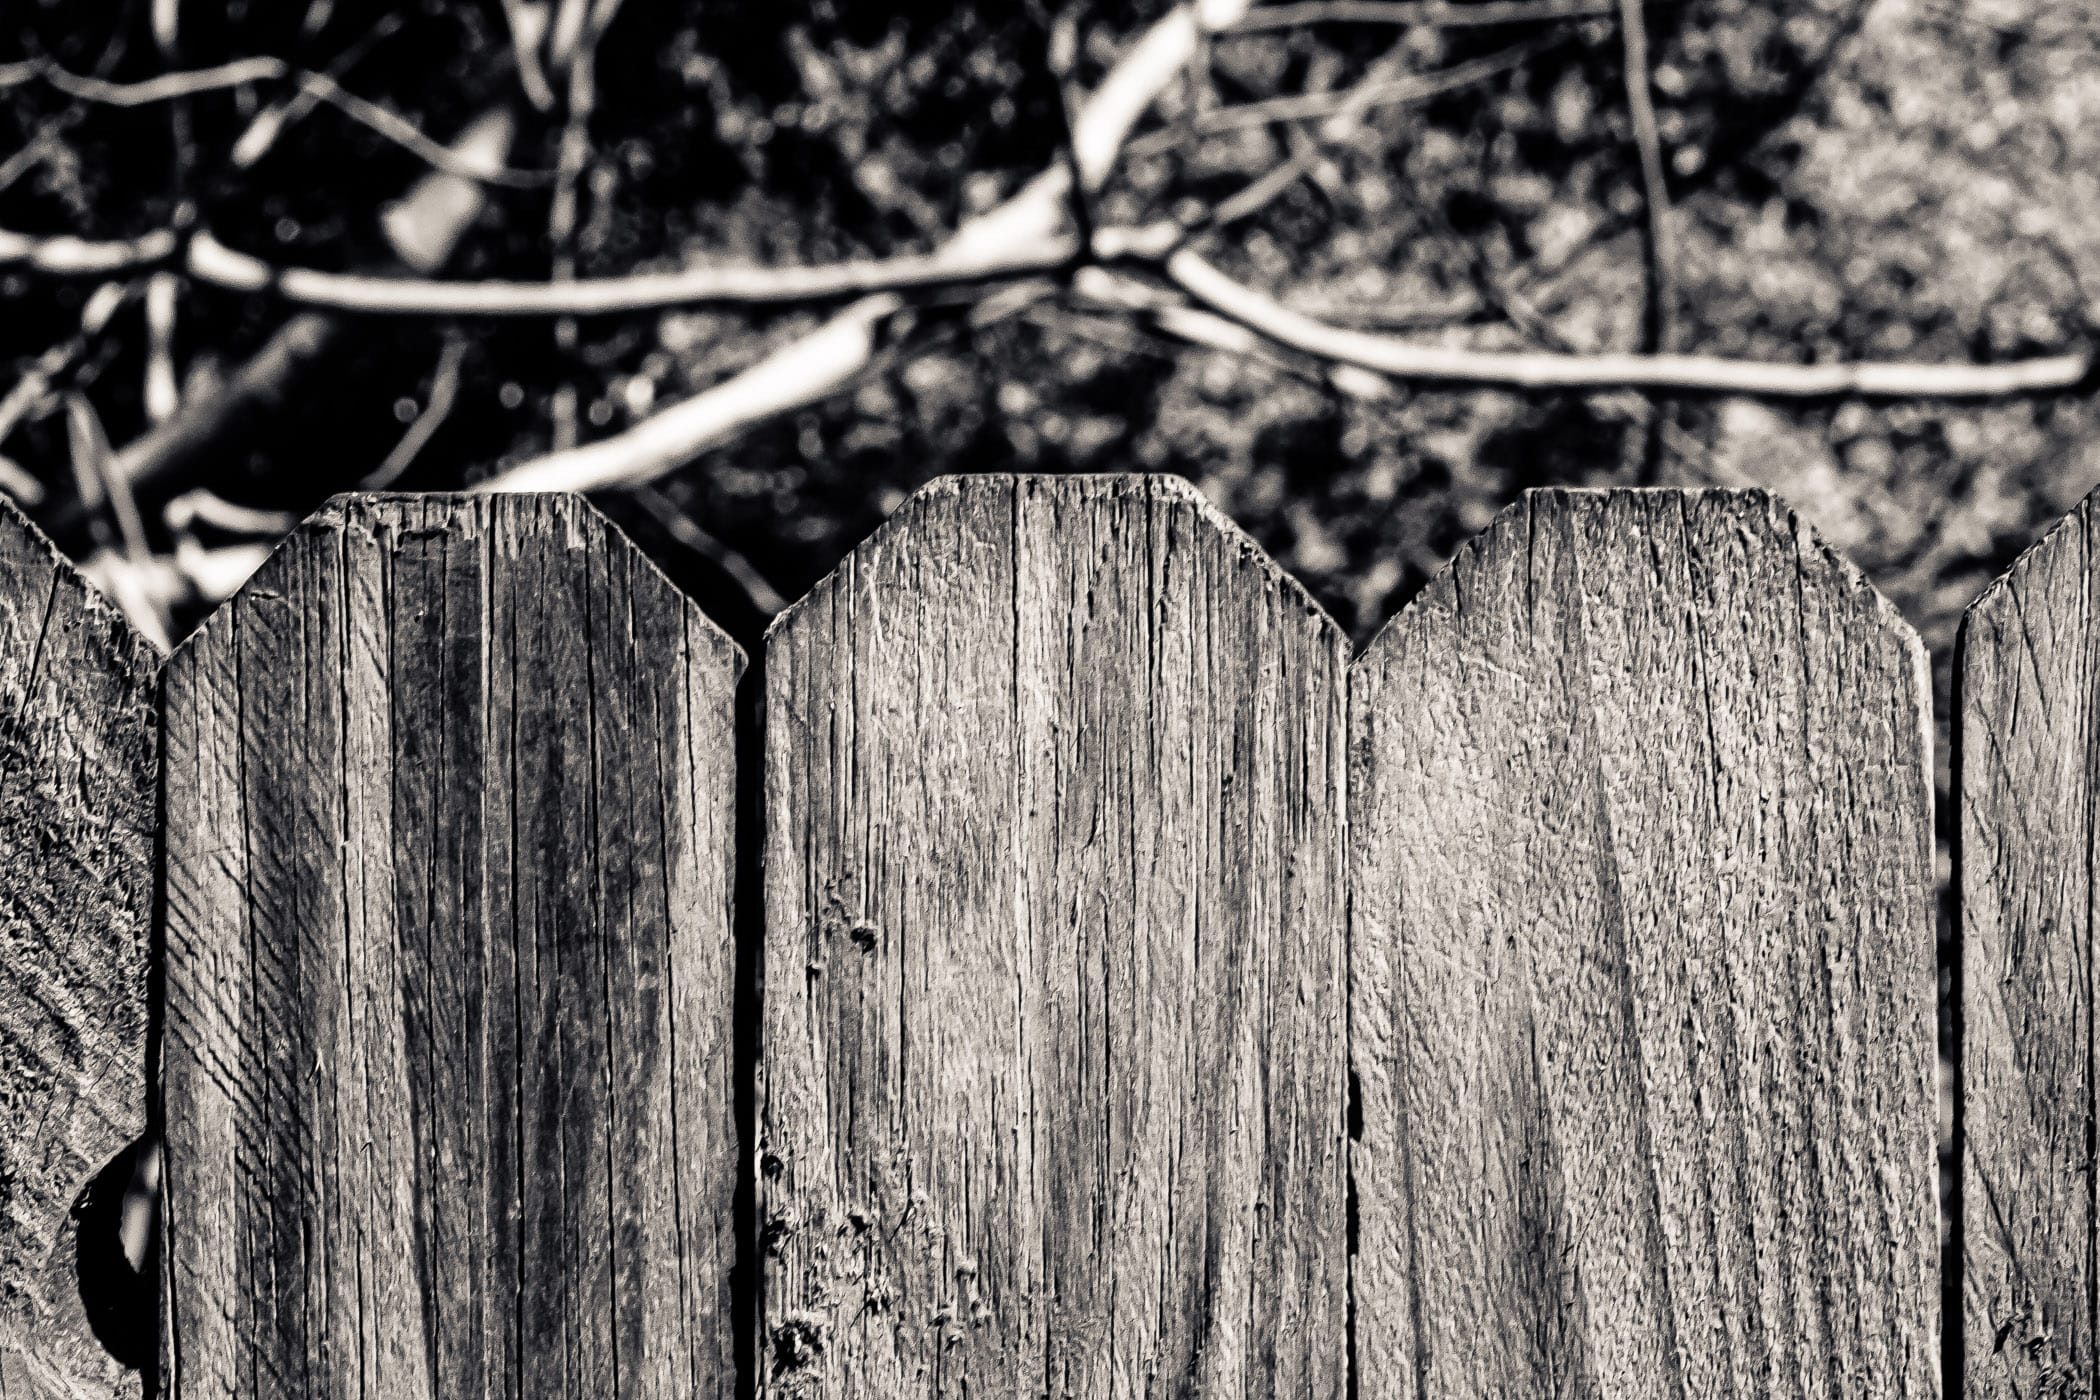 The tops of planks making up a wooden fence, somewhere in Tyler, Texas.